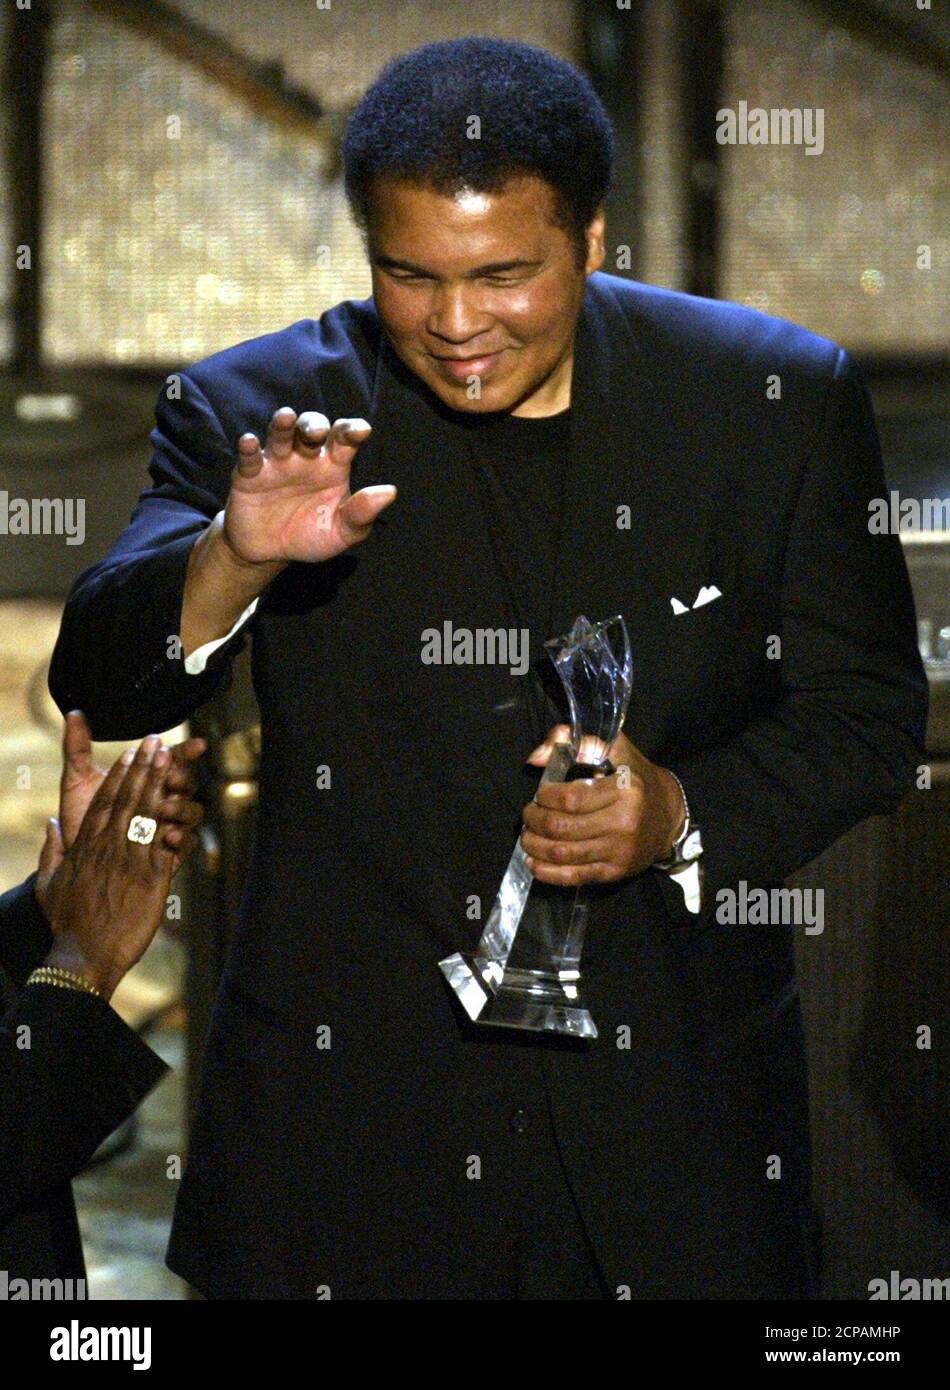 Boxing great Muhammad Ali waves after accepting the Humanitarian Award at the second annual Black Entertainment Television, BET Awards, June 25, 2002 at the Kodak Theatre in Hollywood. The awards show honors excellence by African American performers. REUTERS/Adrees Latif  AL/SV Stock Photo